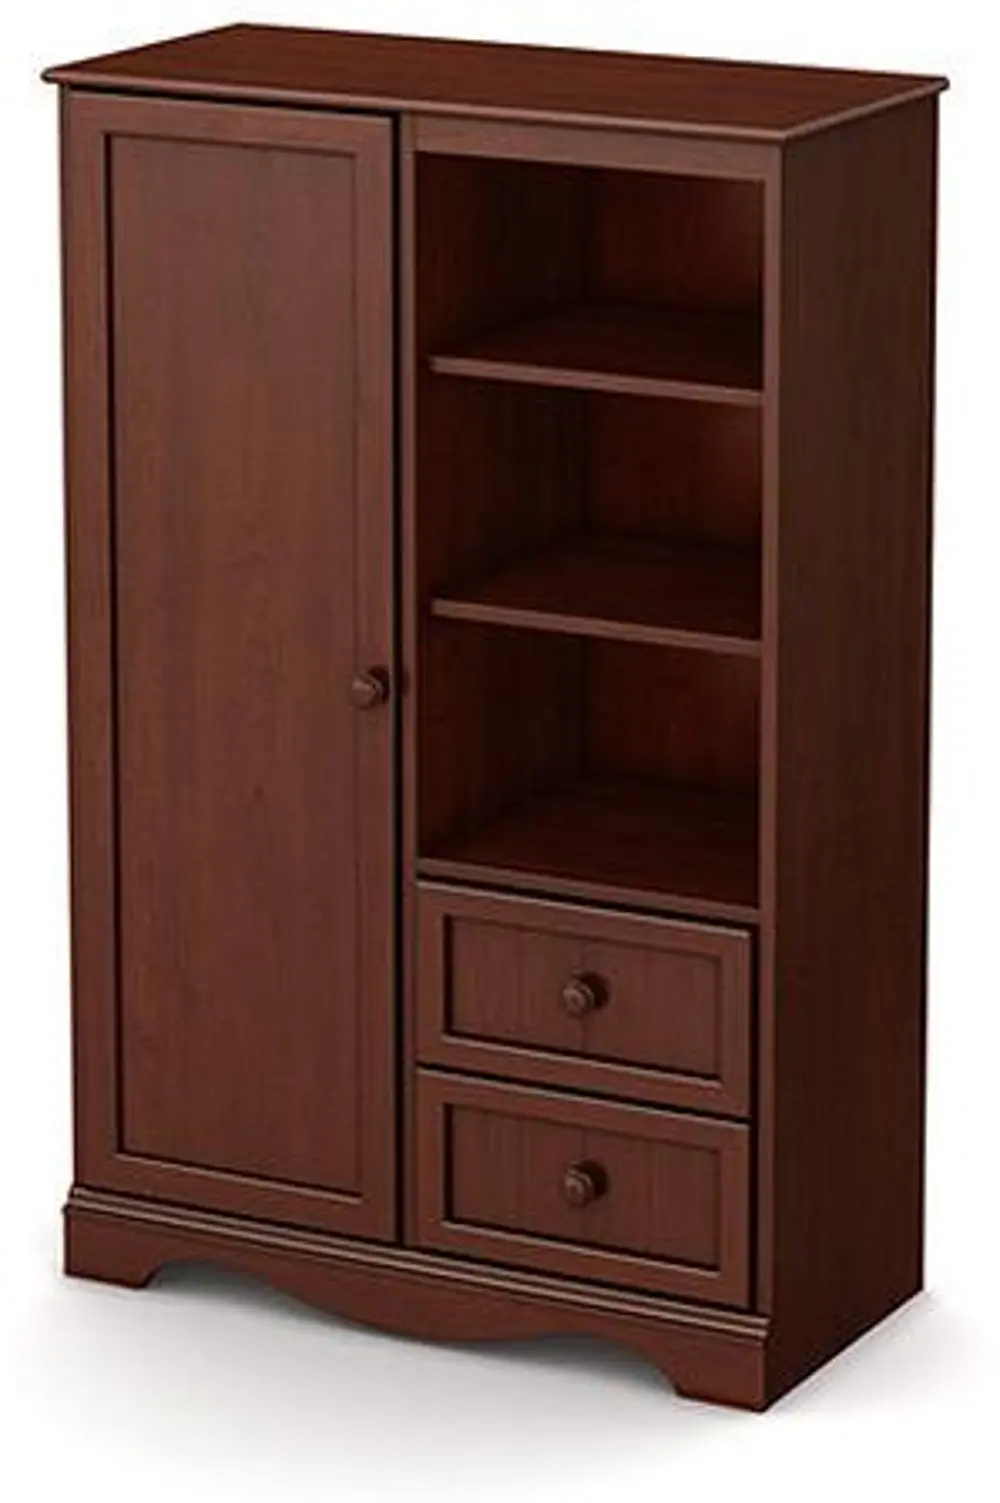 3546038 Savannah Cherry Armoire with Drawers-1